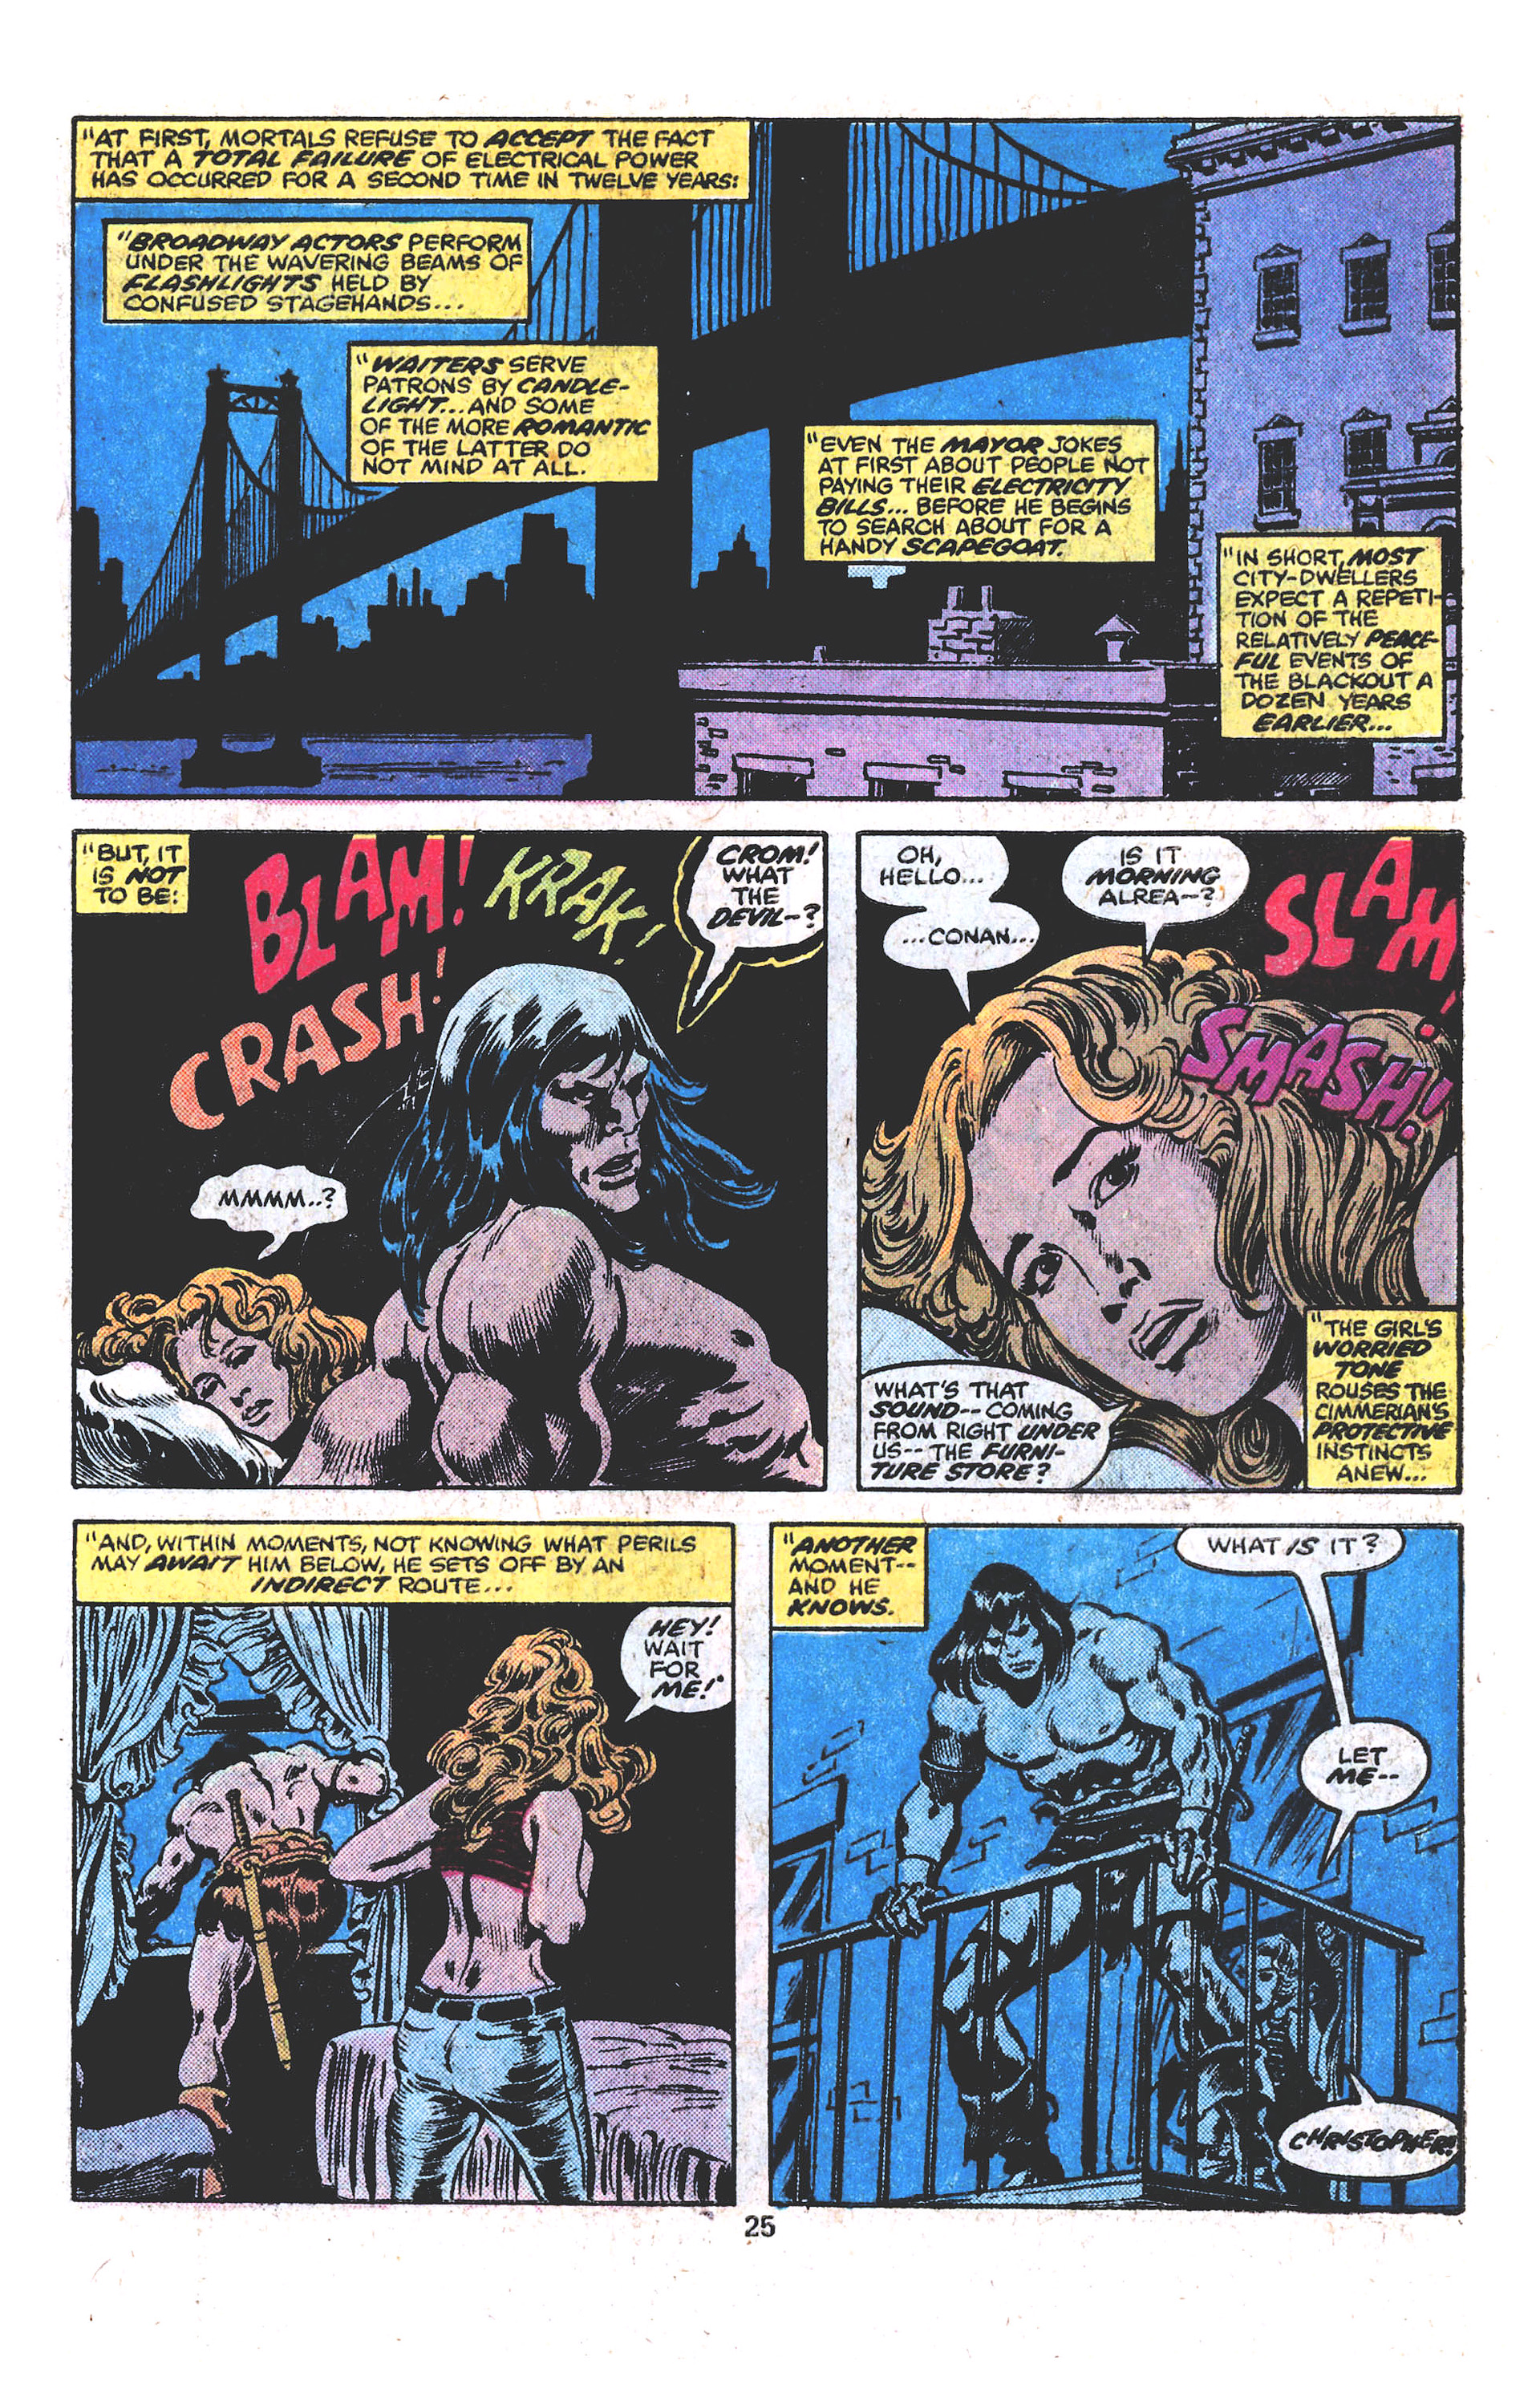 What If? (1977) Issue #13 - Conan The Barbarian walked the Earth Today #13 - English 20